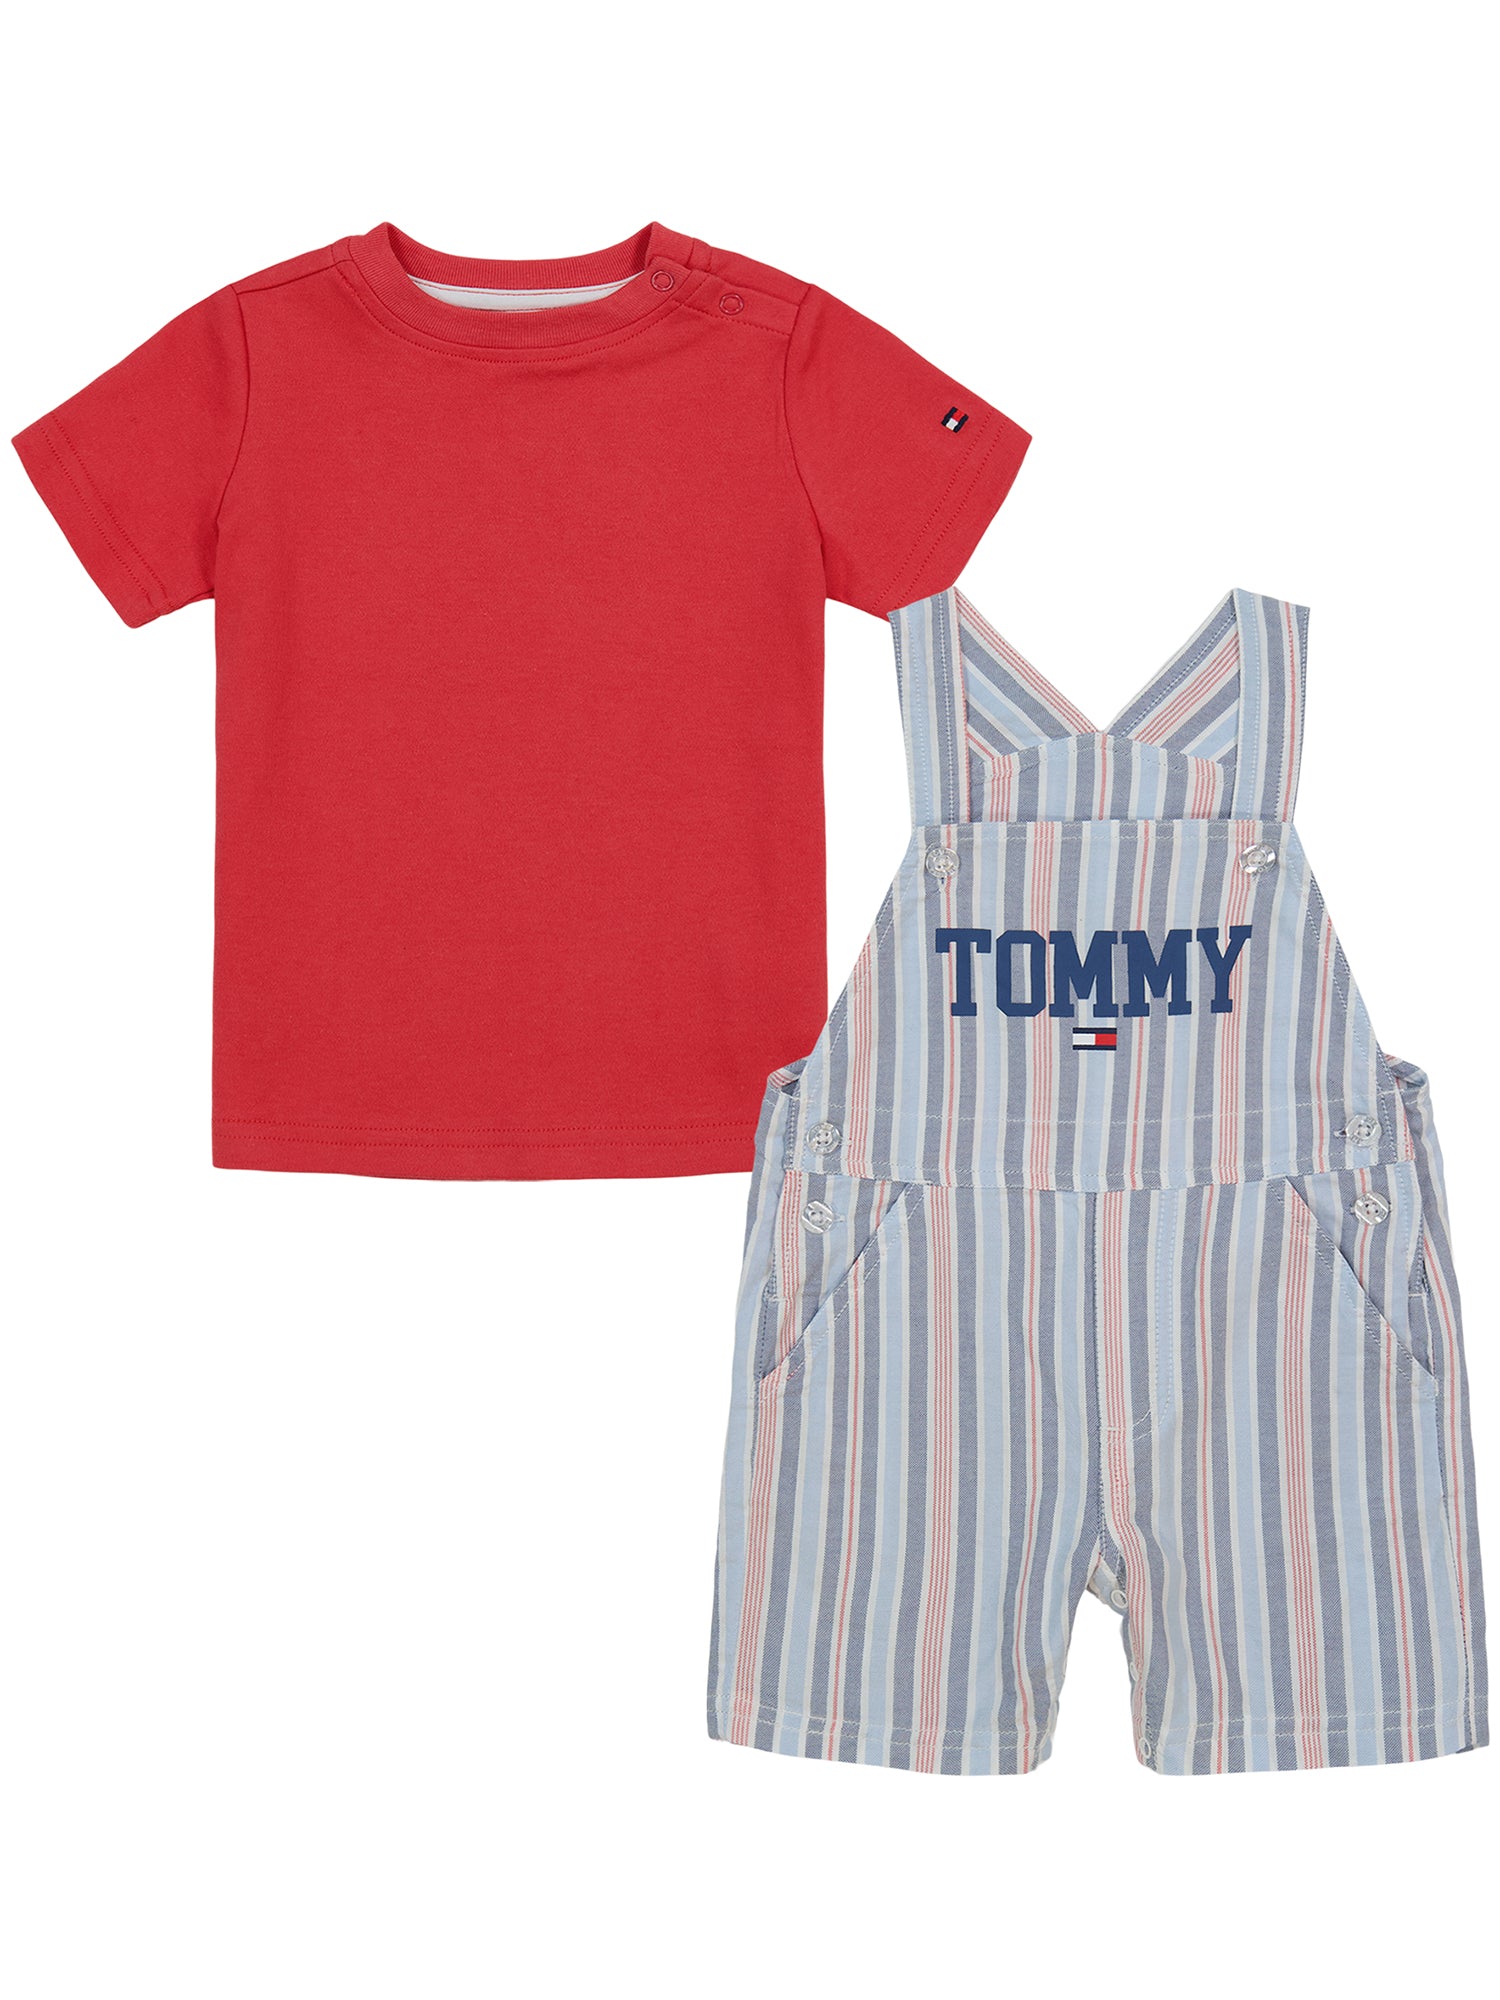 Tommy Hilfiger Red and Blue Stripe Shortall Set